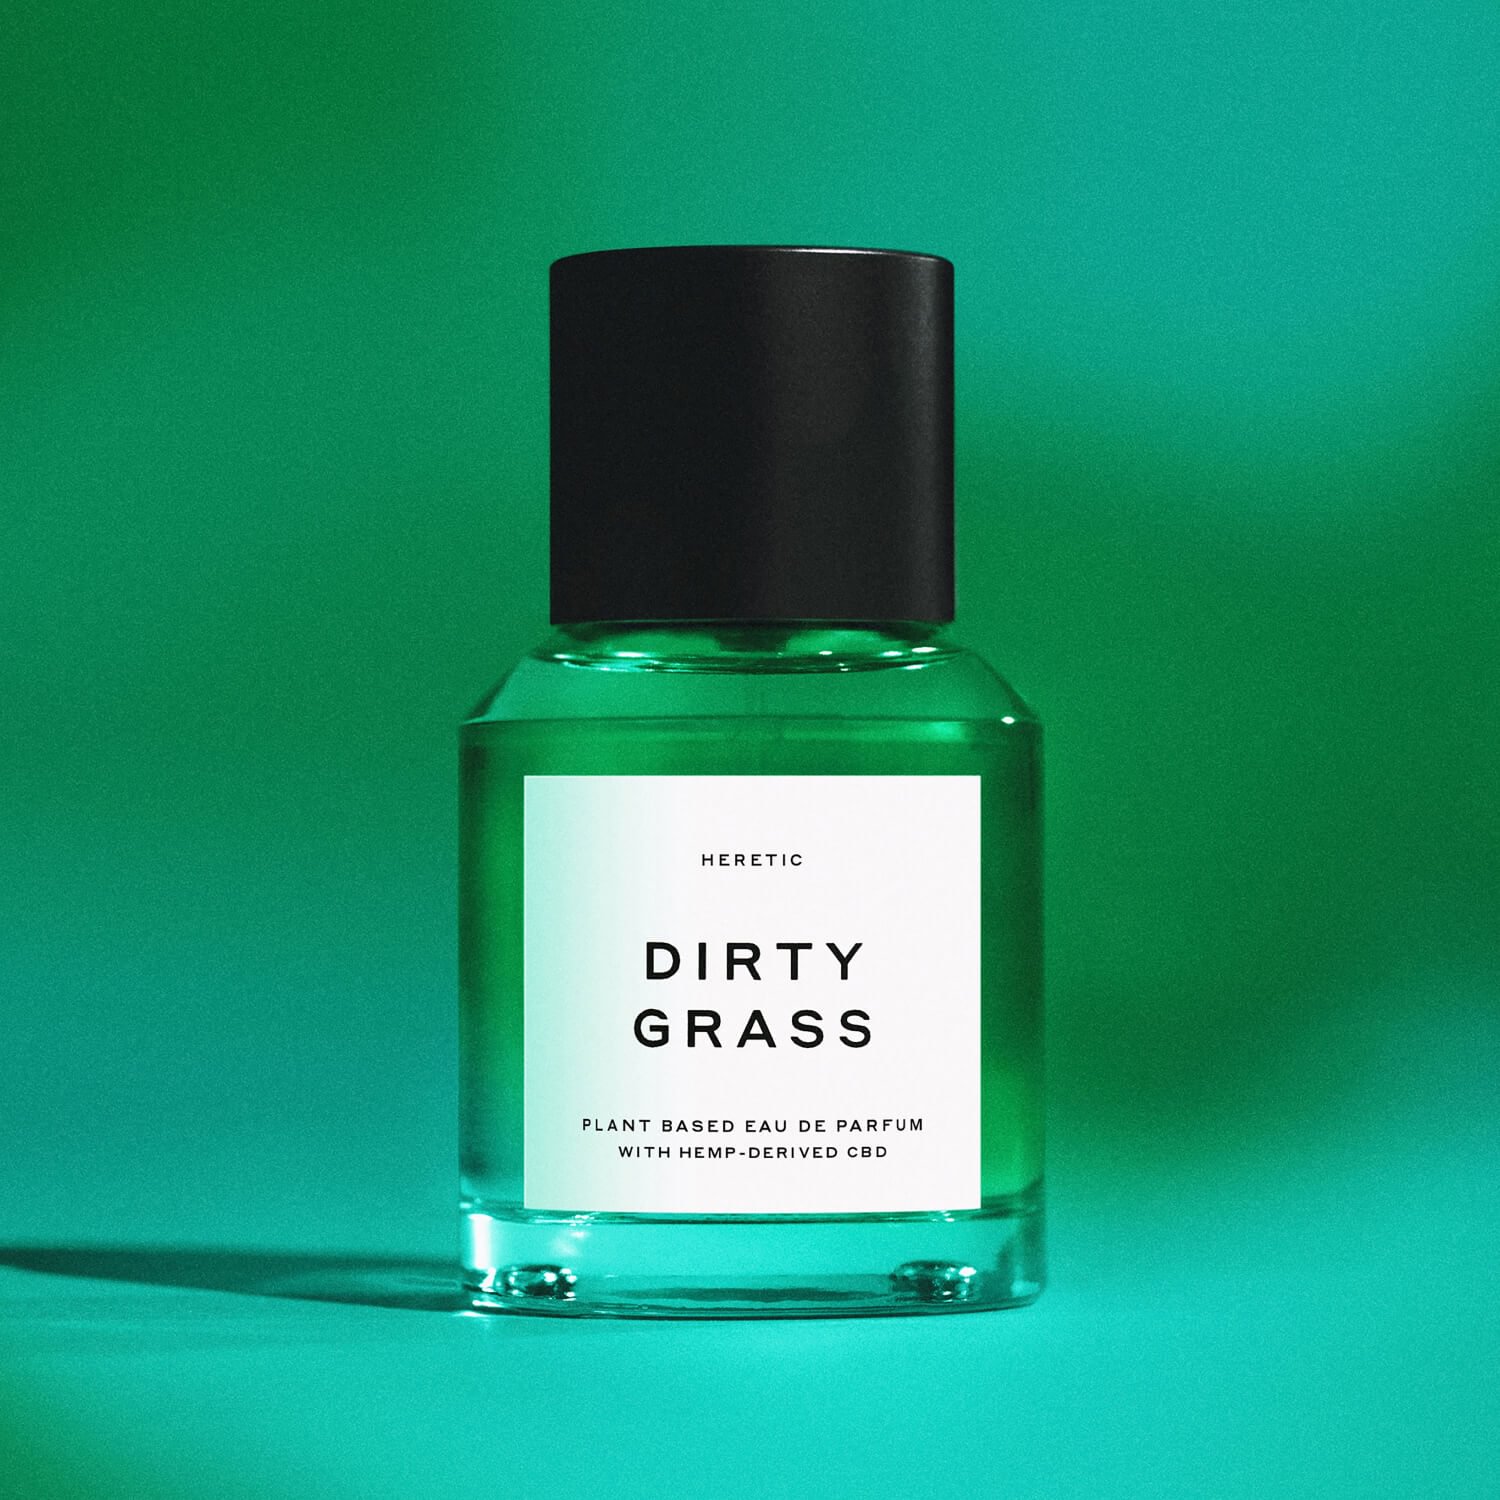 Score HERETIC Dirty Grass cologne at Scentbird for $16.95